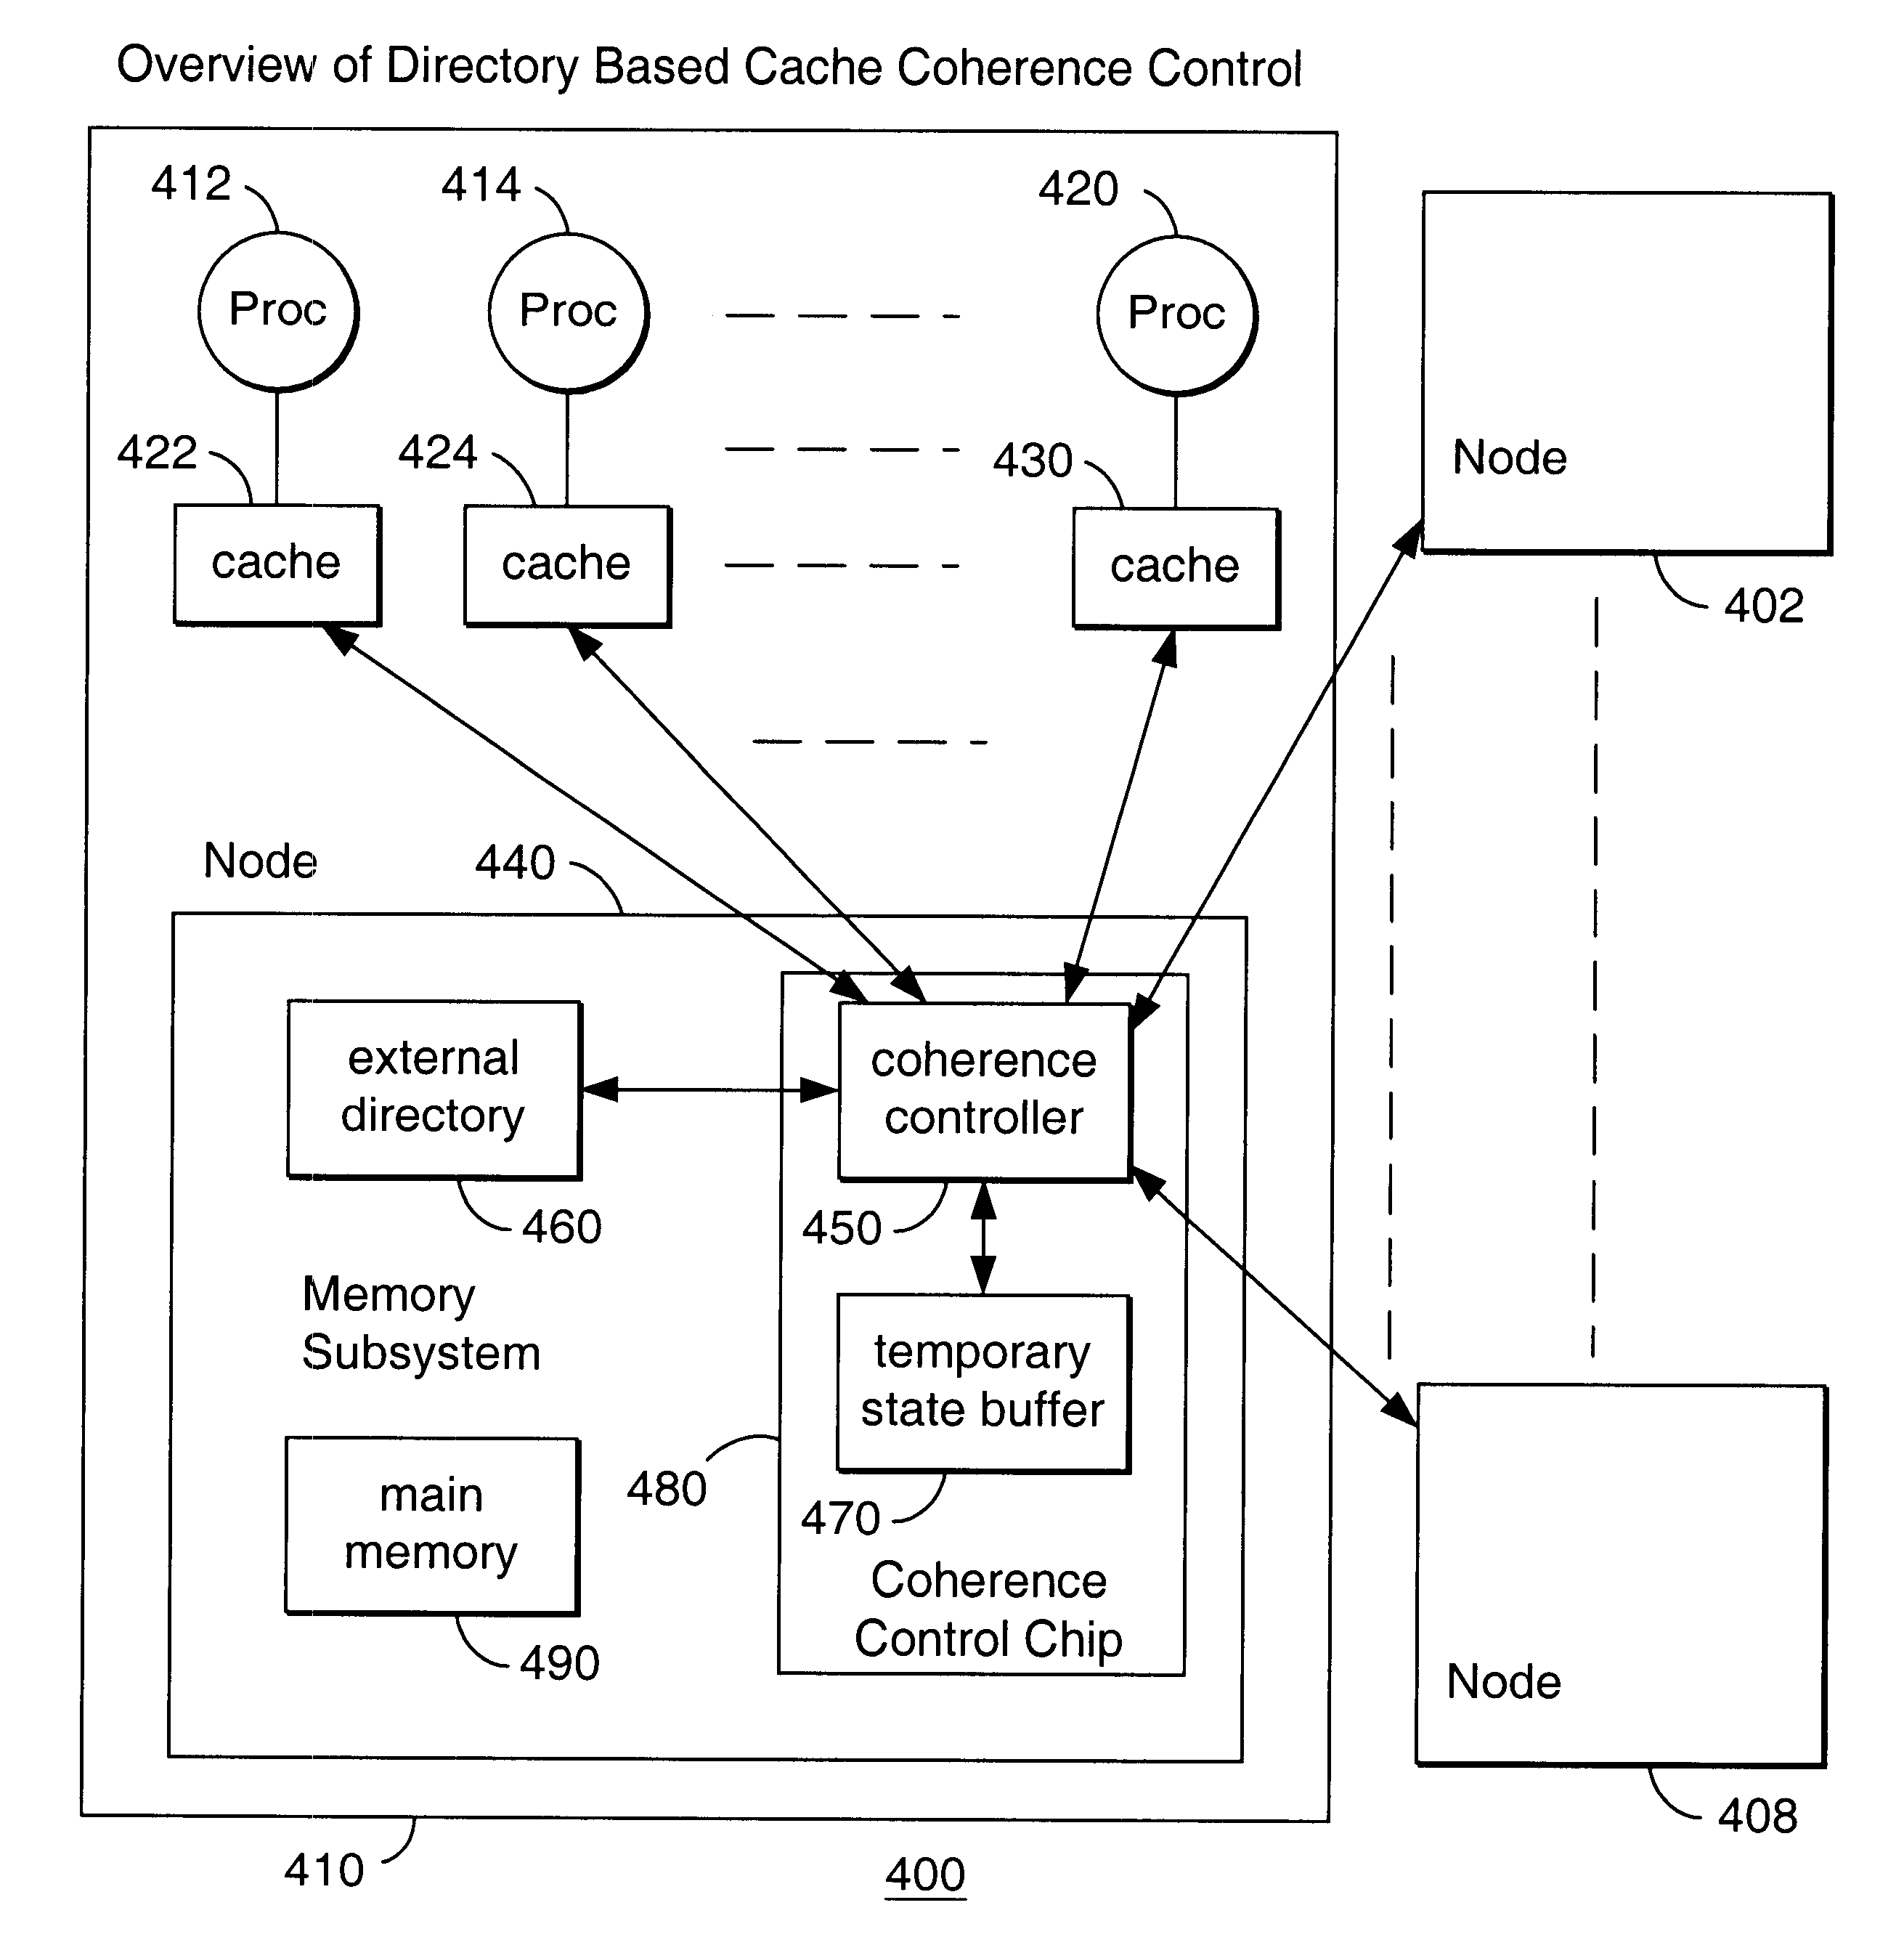 Split sparse directory for a distributed shared memory multiprocessor system